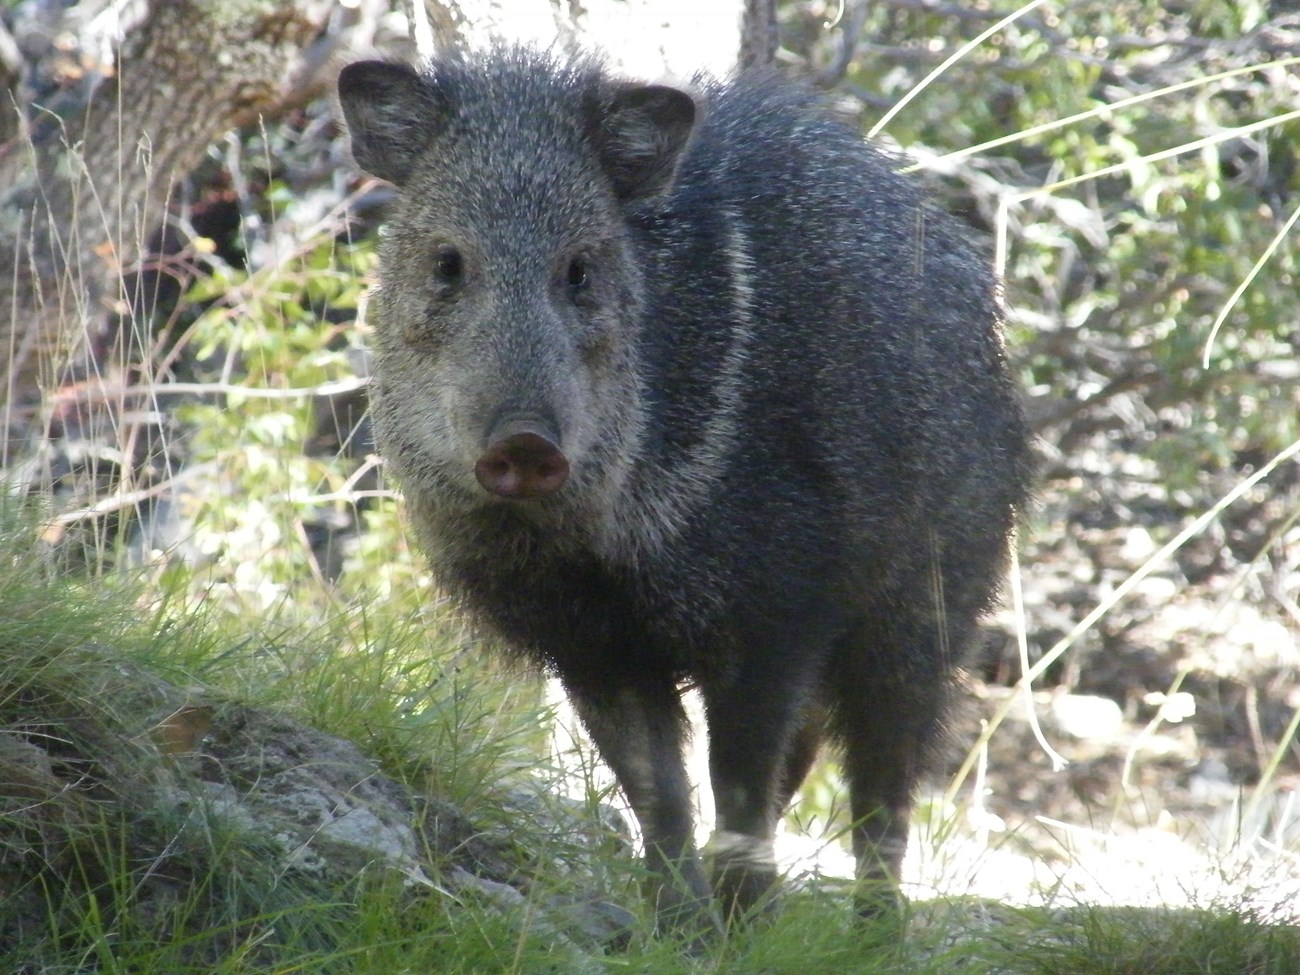 Medium-sized pig-like animal (that is not a pig) covered in coarse, bristly, grey-brown hair, with a pale tan collar around its neck.